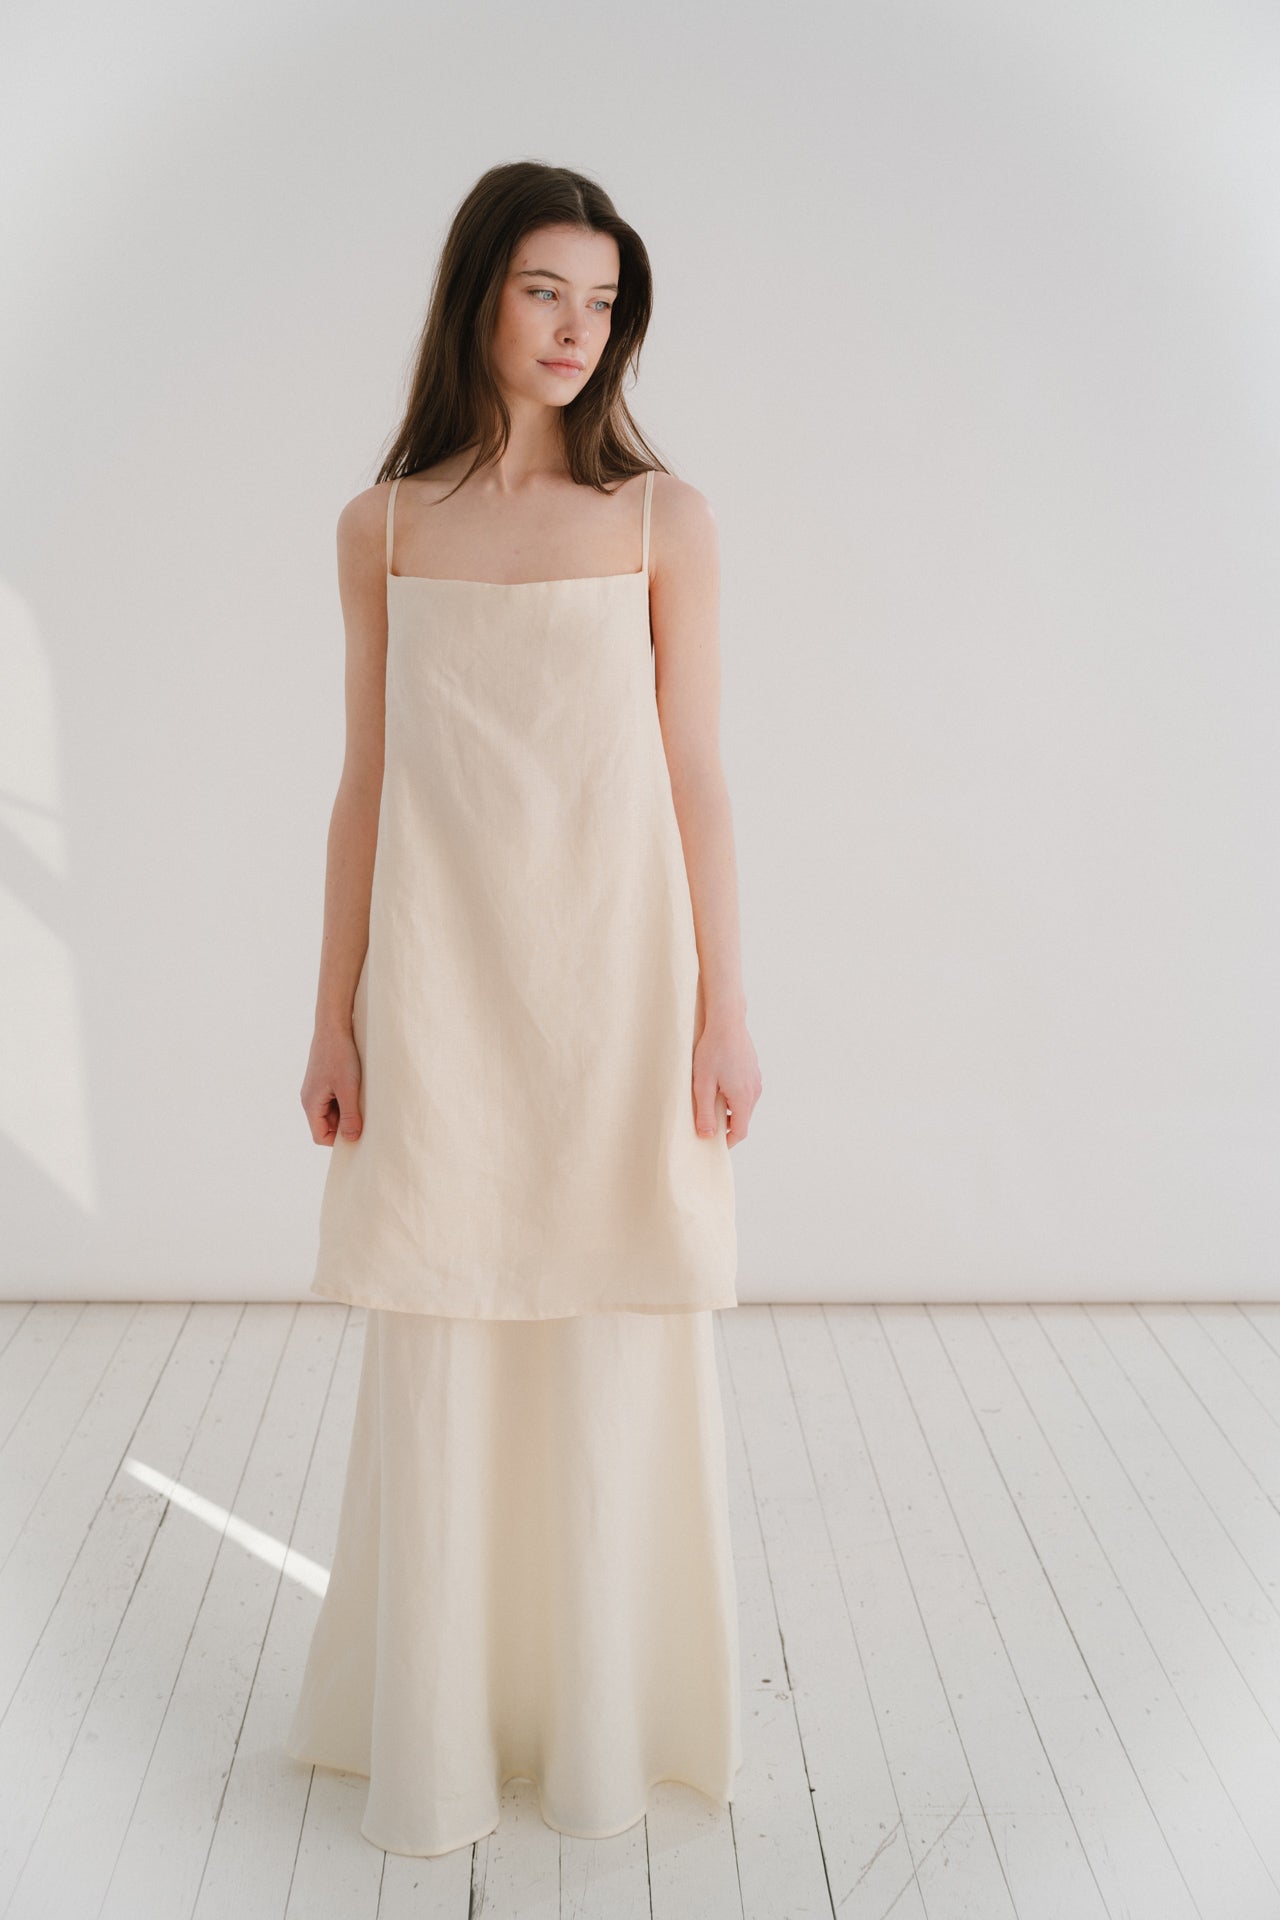 THE ELLA MINI | THE ELLA MINI A new shape for us for SS24, the Ella mini is one of our most simple and paired back silhouettes to date. She features a simple square neckline that cowls slightly. The delicate straps crossover each other at the back and att